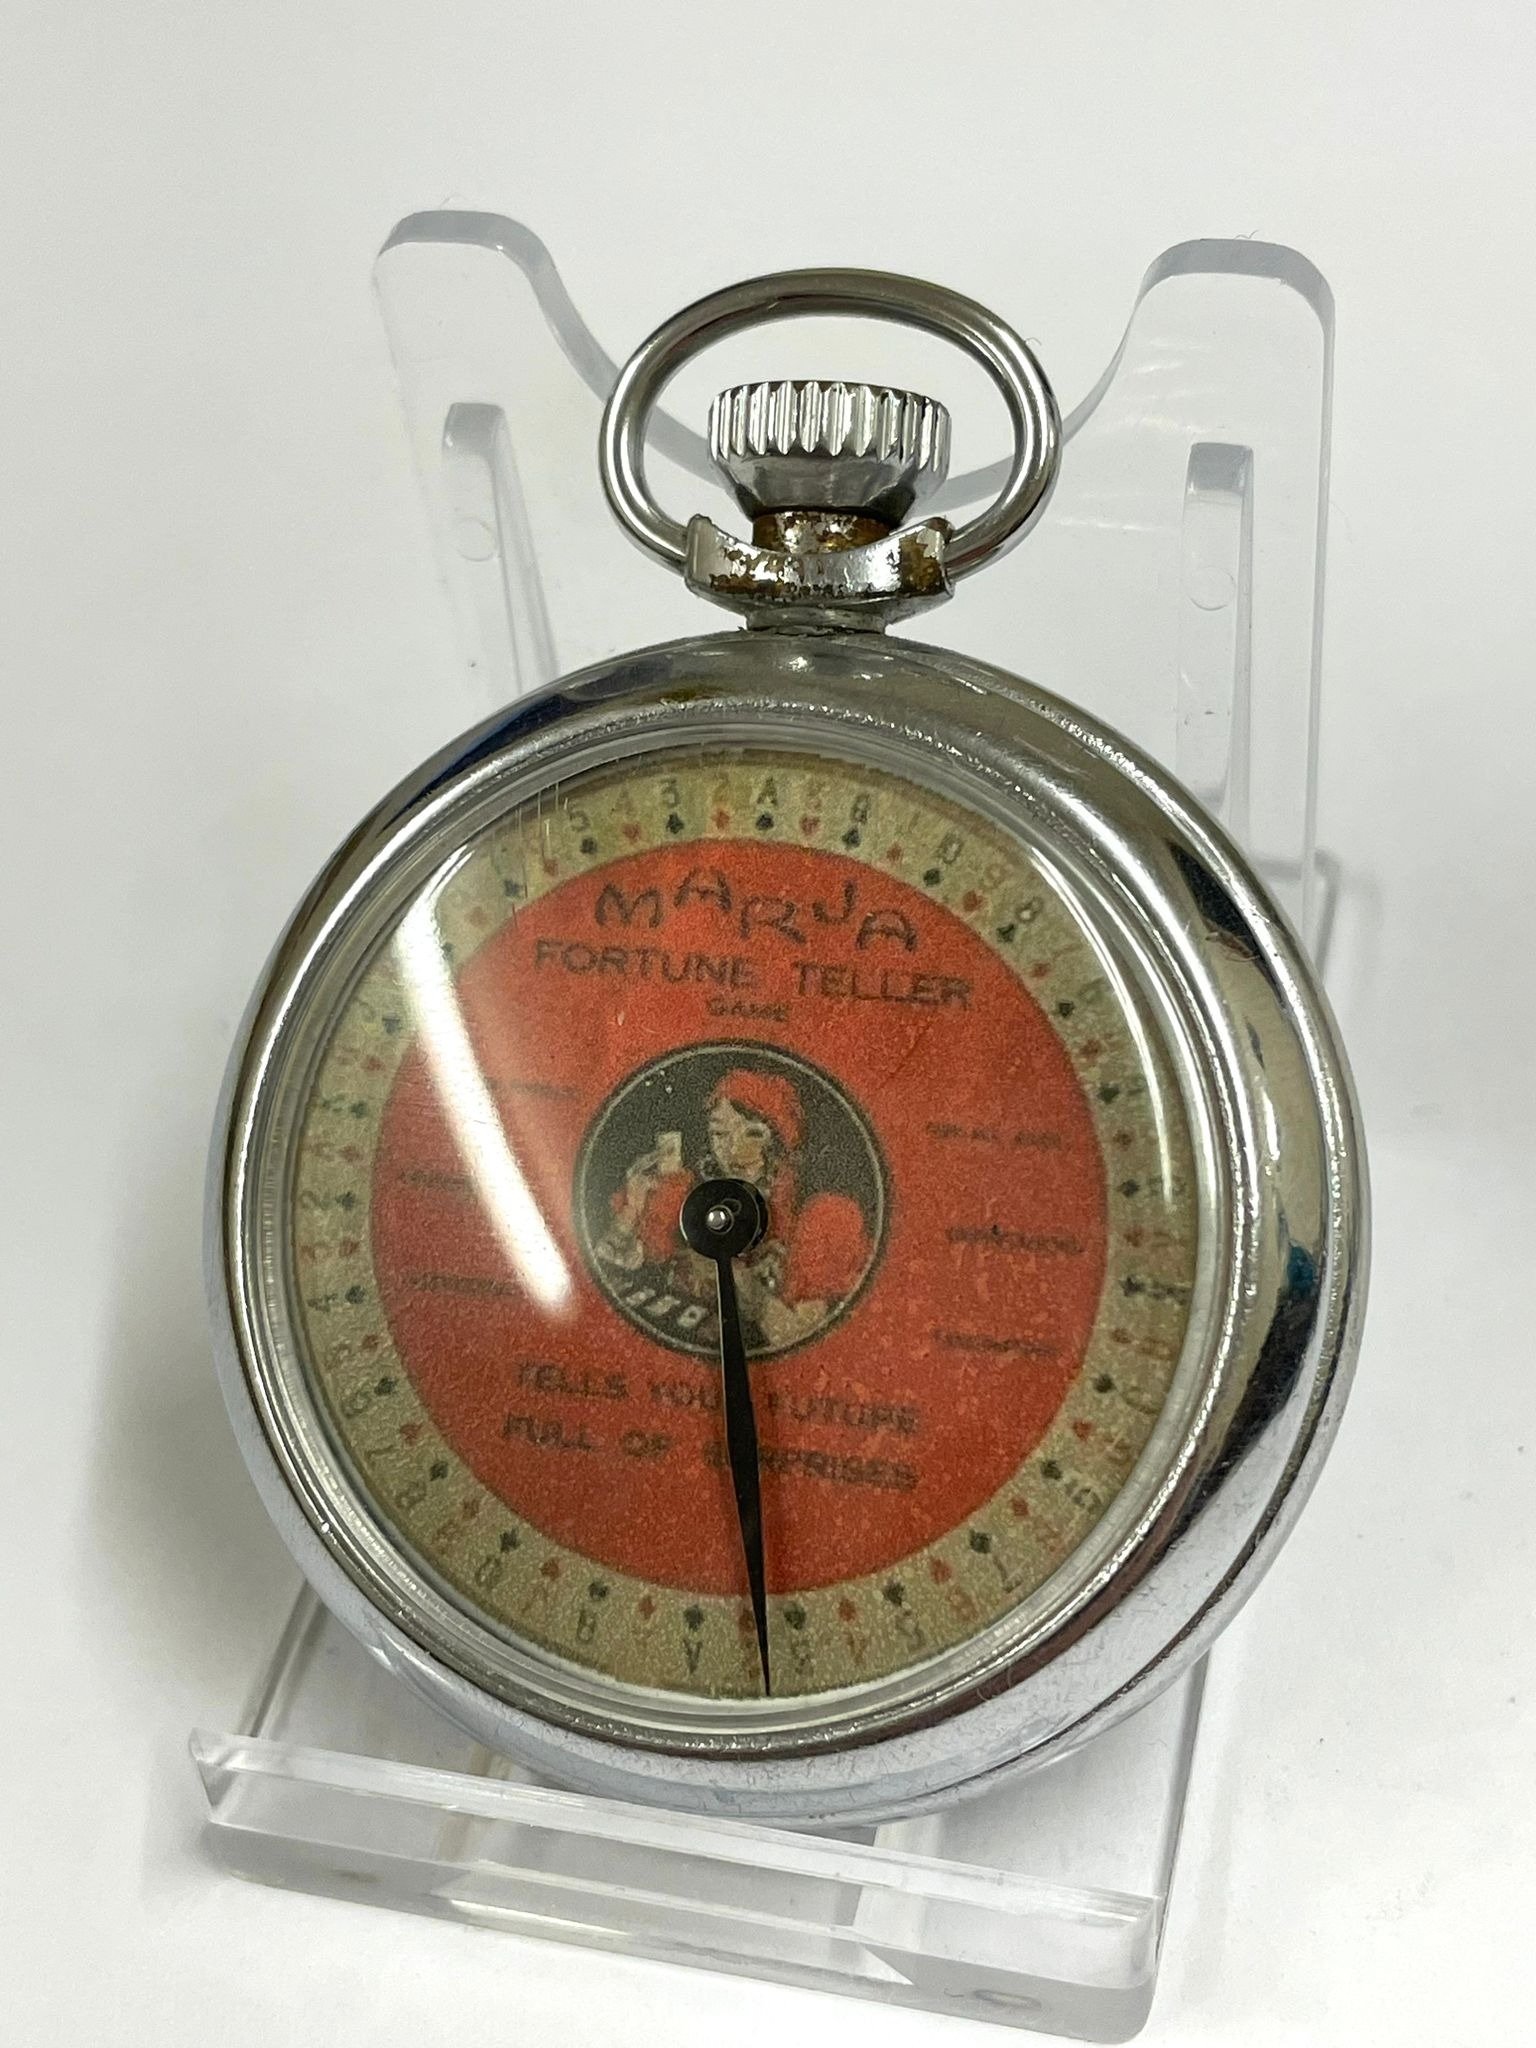 A Vintage fortune teller spinning gaming pocket watch. In working order. - Image 2 of 2